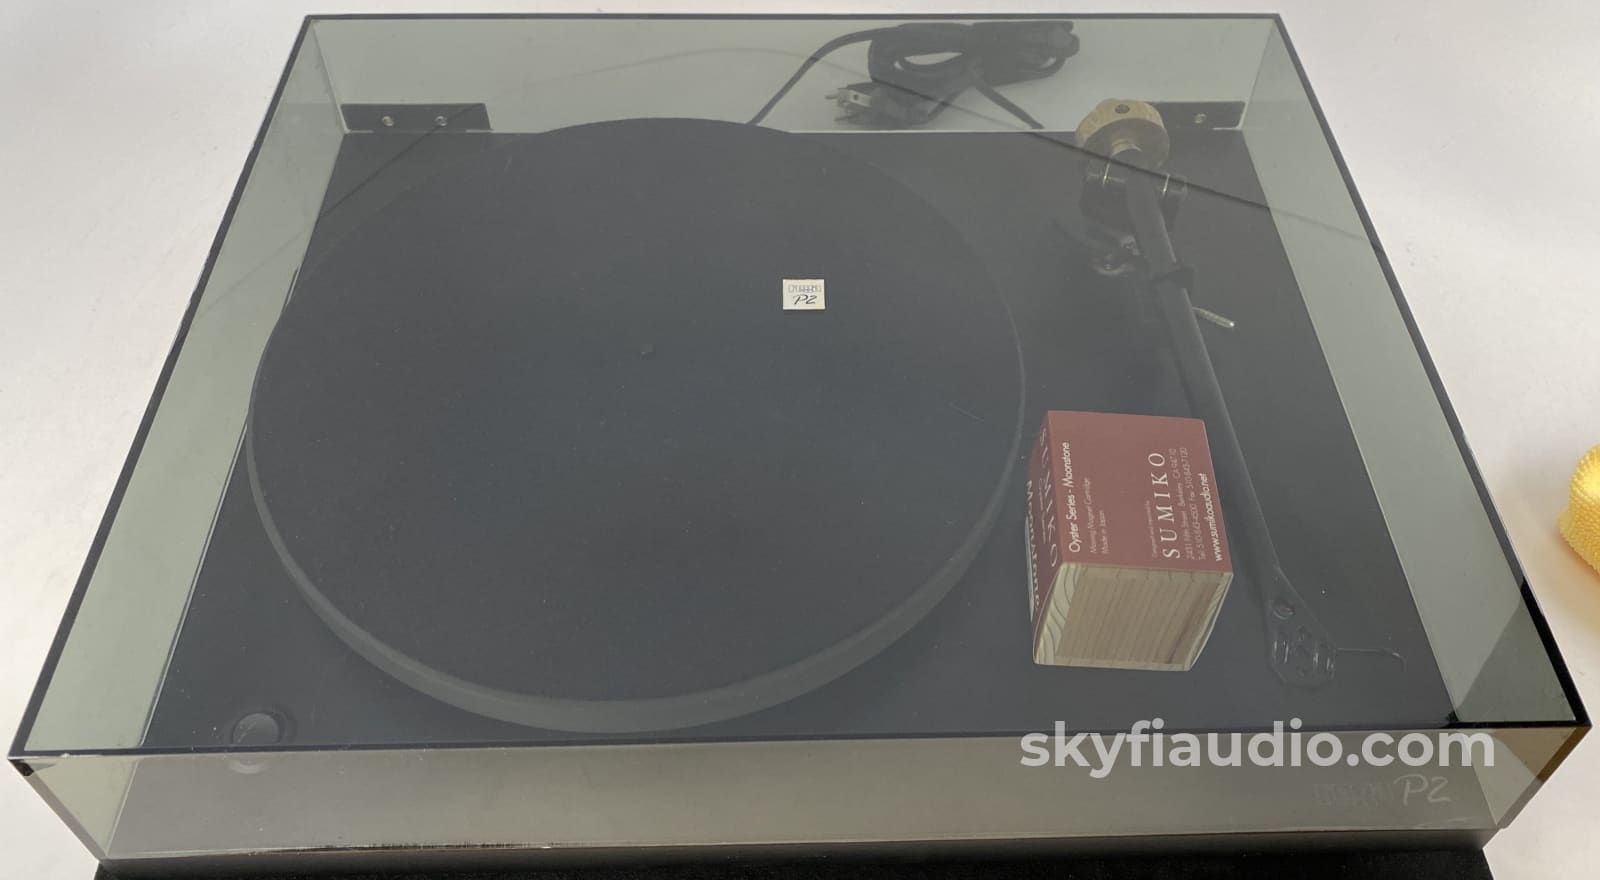 Rega Planar 2 (P2) Turntable With New Sumiko Cartridge And Upgrades